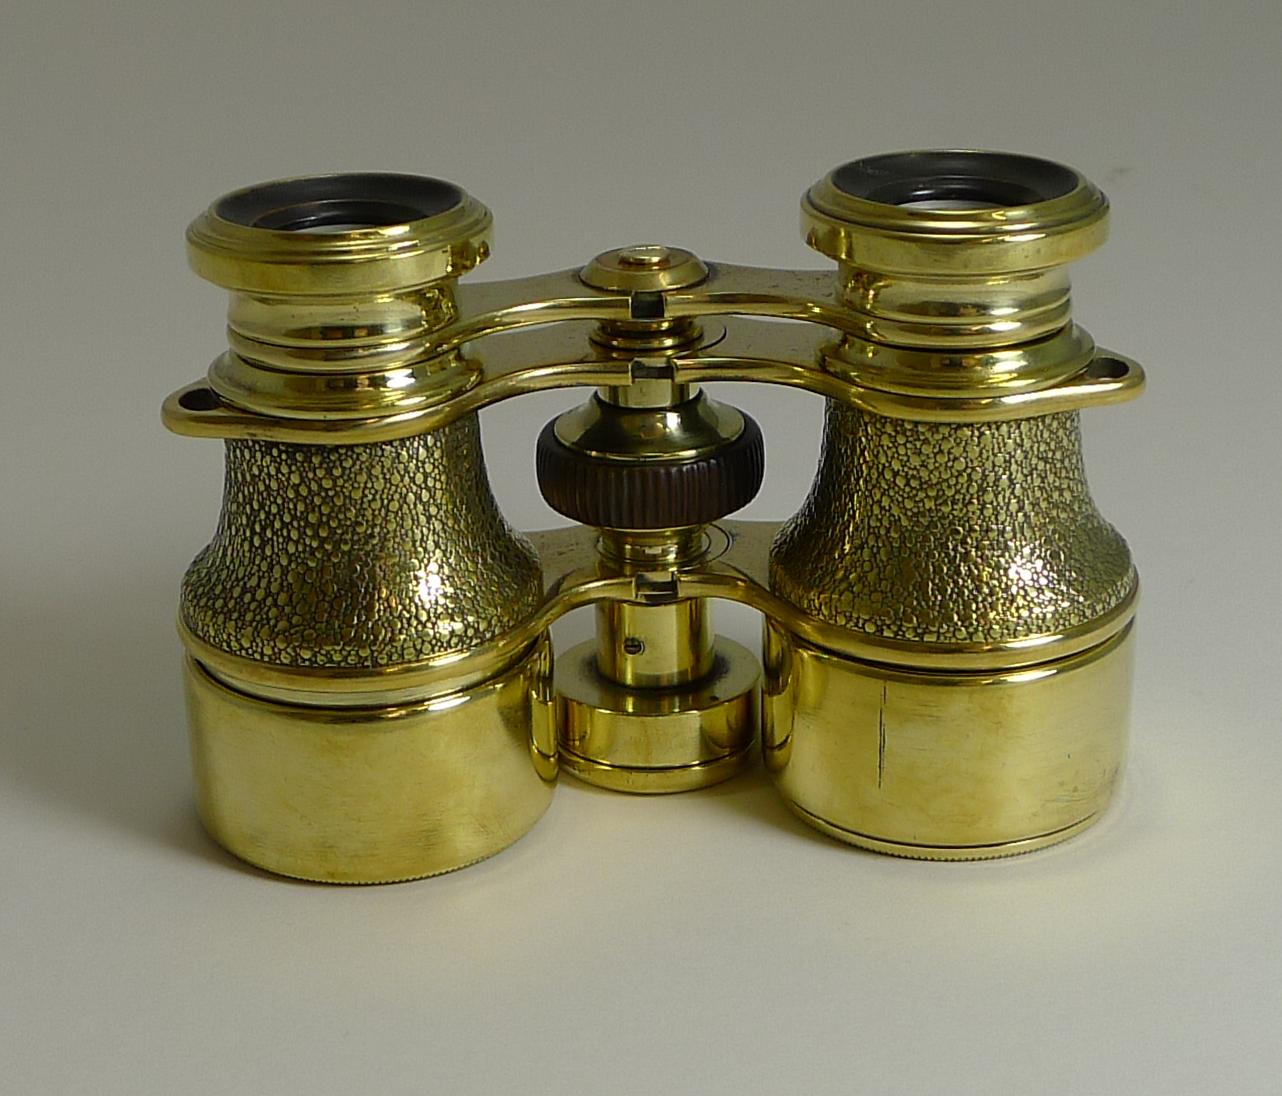 Early 20th Century Antique English Field Glasses / Binoculars by Lawrence and Mayo - With Compass